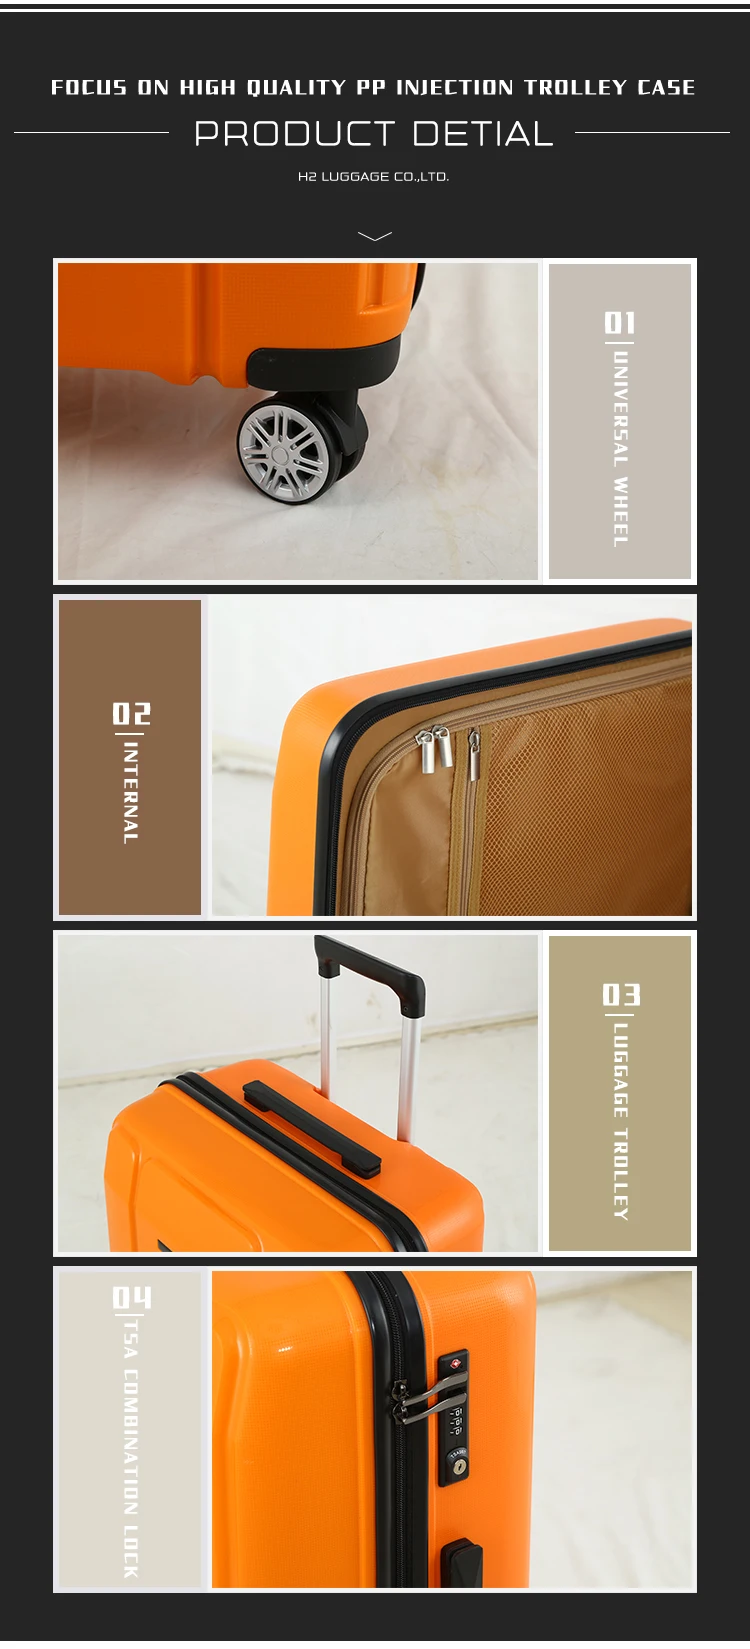 H2 Luggage design  PP travel trolley luggage bag the gentleman windsuitcases set 3 pcs